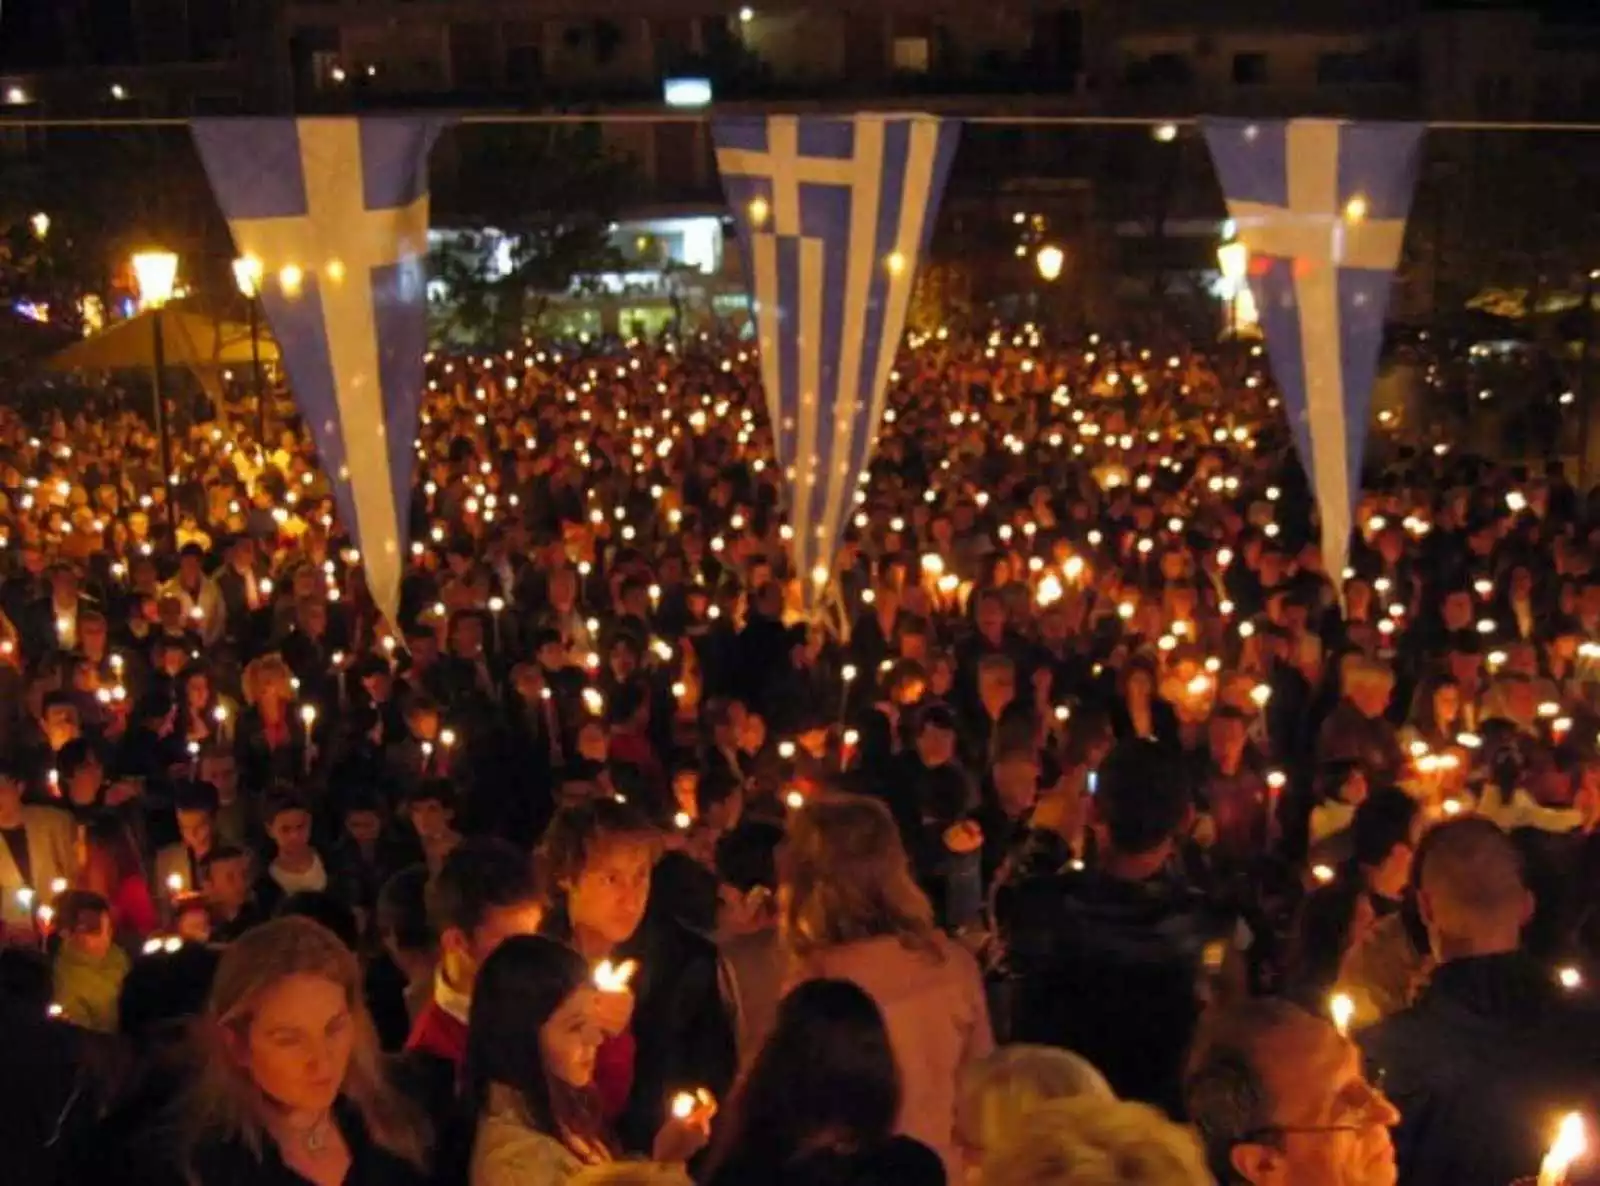 Greeks commemorate Orthodox Easter publicly - Cities bright with candles, songs on Holy Saturday.